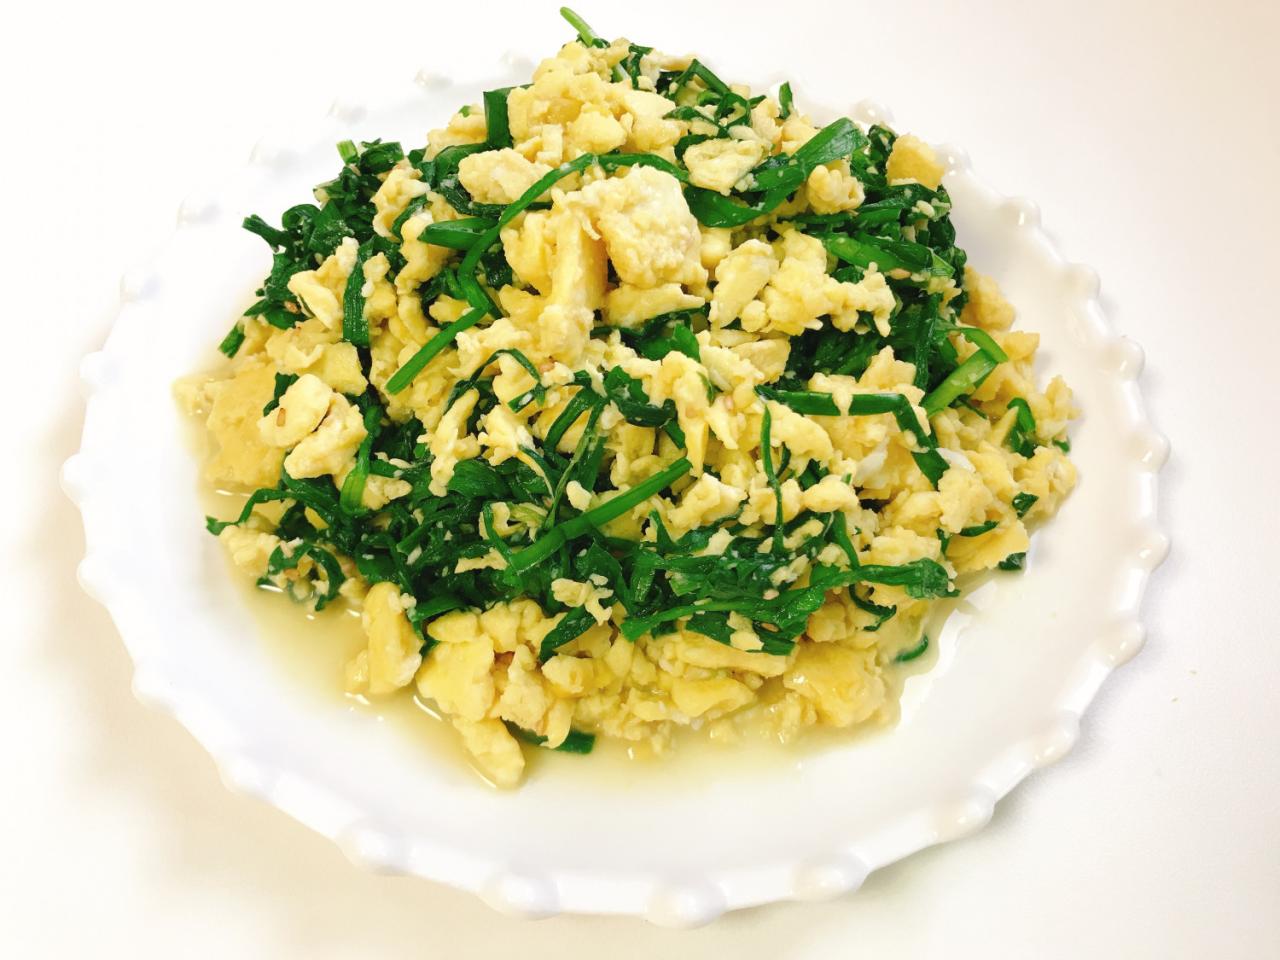 Stir-fried chives and eggs It's a simple and delicious side dish